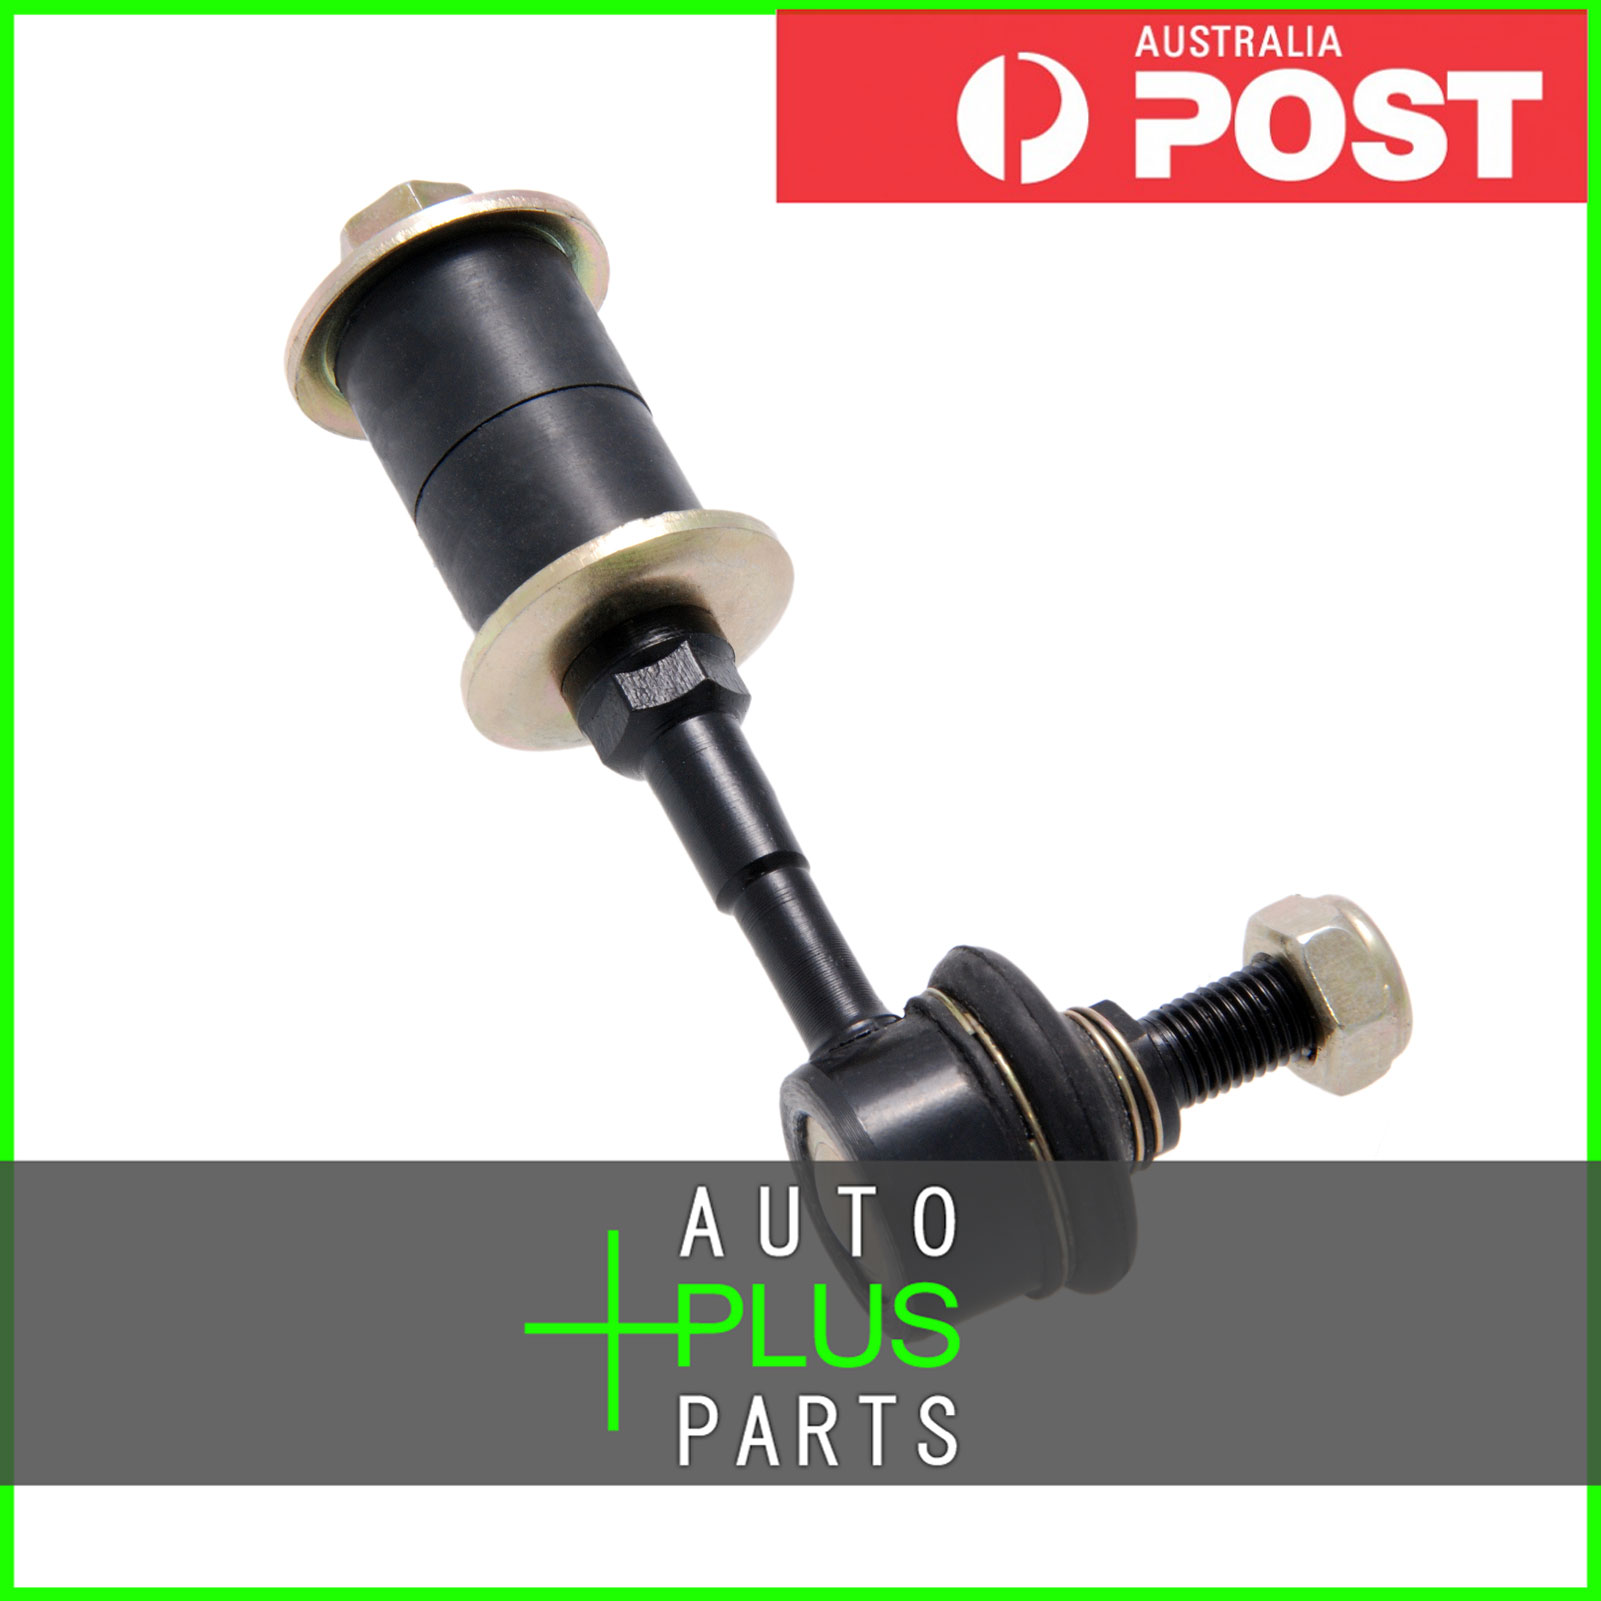 Fits DAIHATSU TERIOS J200 2006- - FRONT STABILIZER LINK / SWAY BAR LINK Product Photo